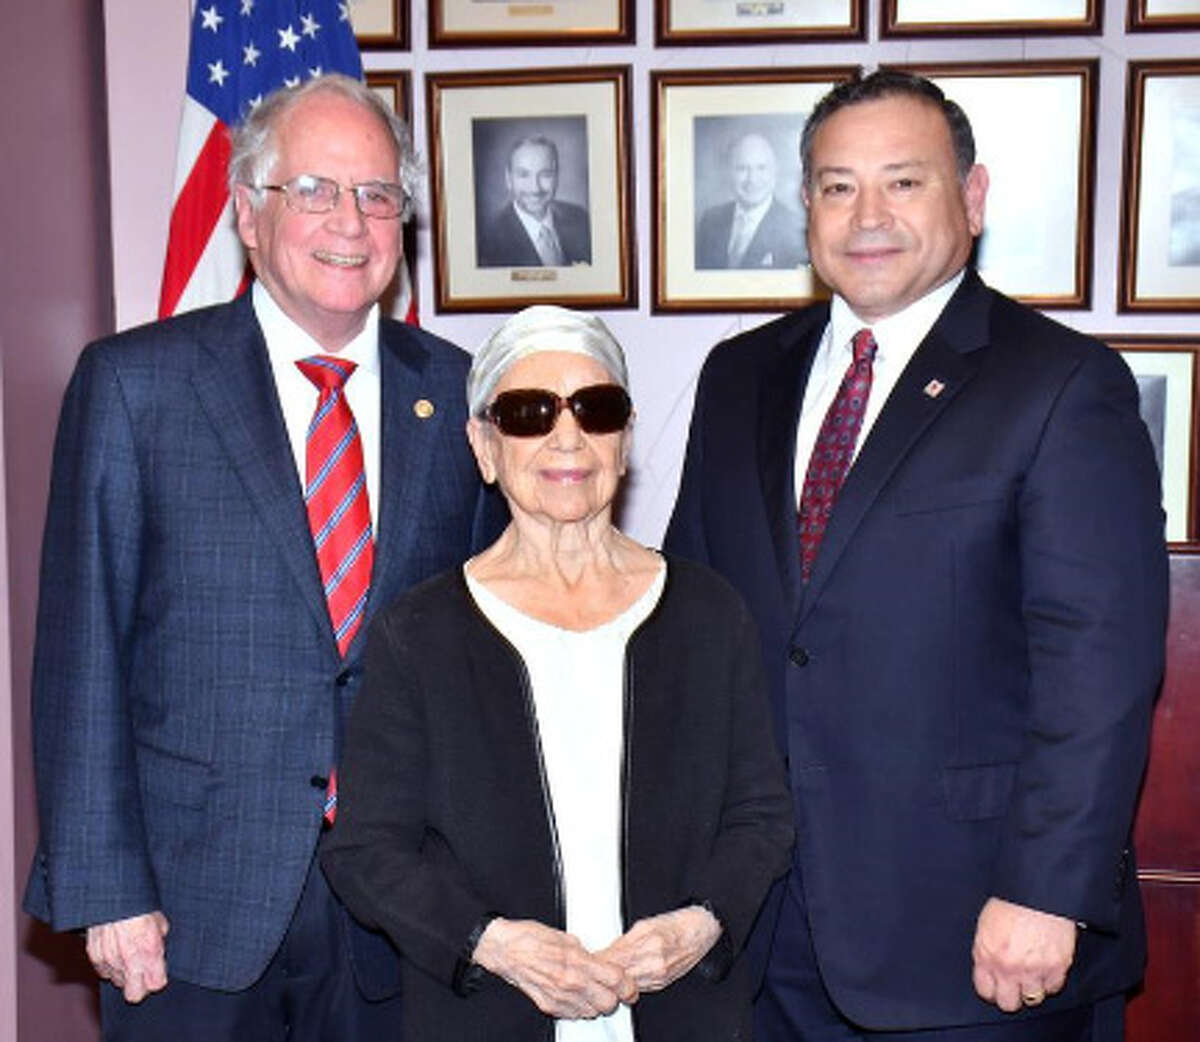 Junior Achievement’s Business Hall of Fame laureates for 2019 were announced Thursday at the Laredo Chamber of Commerce. The honorees are, from left, William Green, Marti Franco and Gilbert Narvaez Jr. They will be recognized at the Laredo Country Club on May 2.